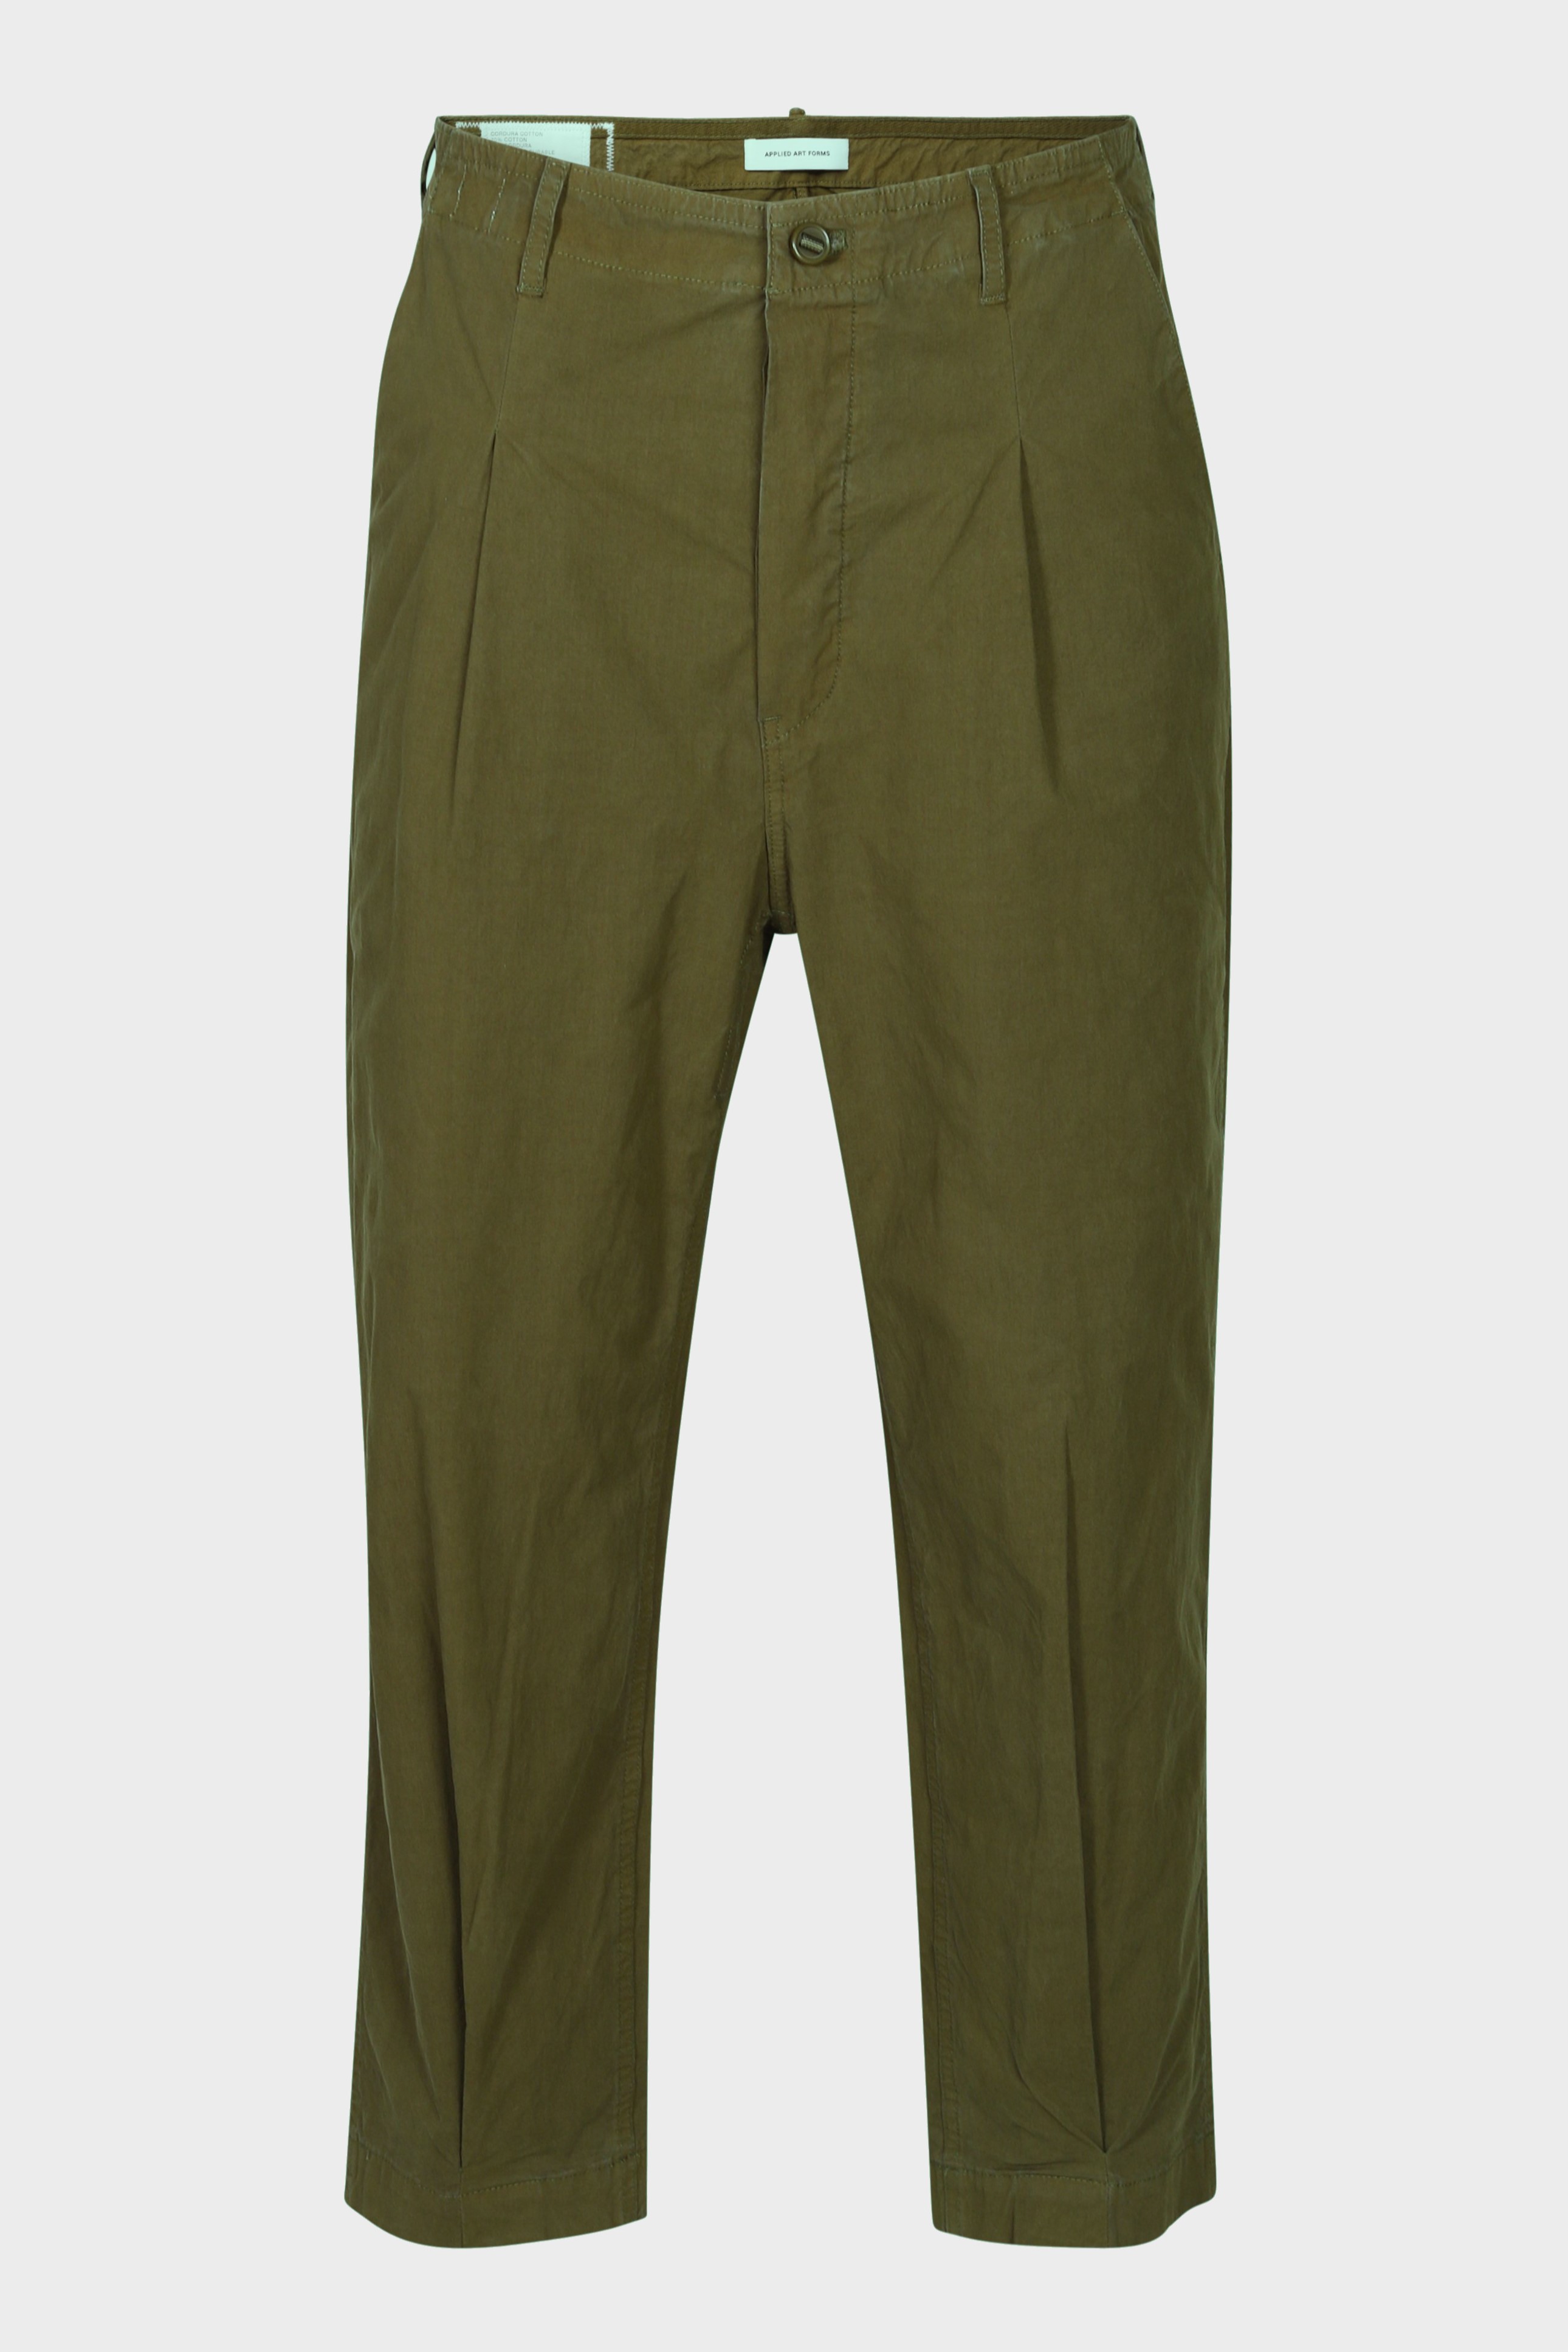 APPLIED ART FORMS Japanese Cargo Pant in Military Green